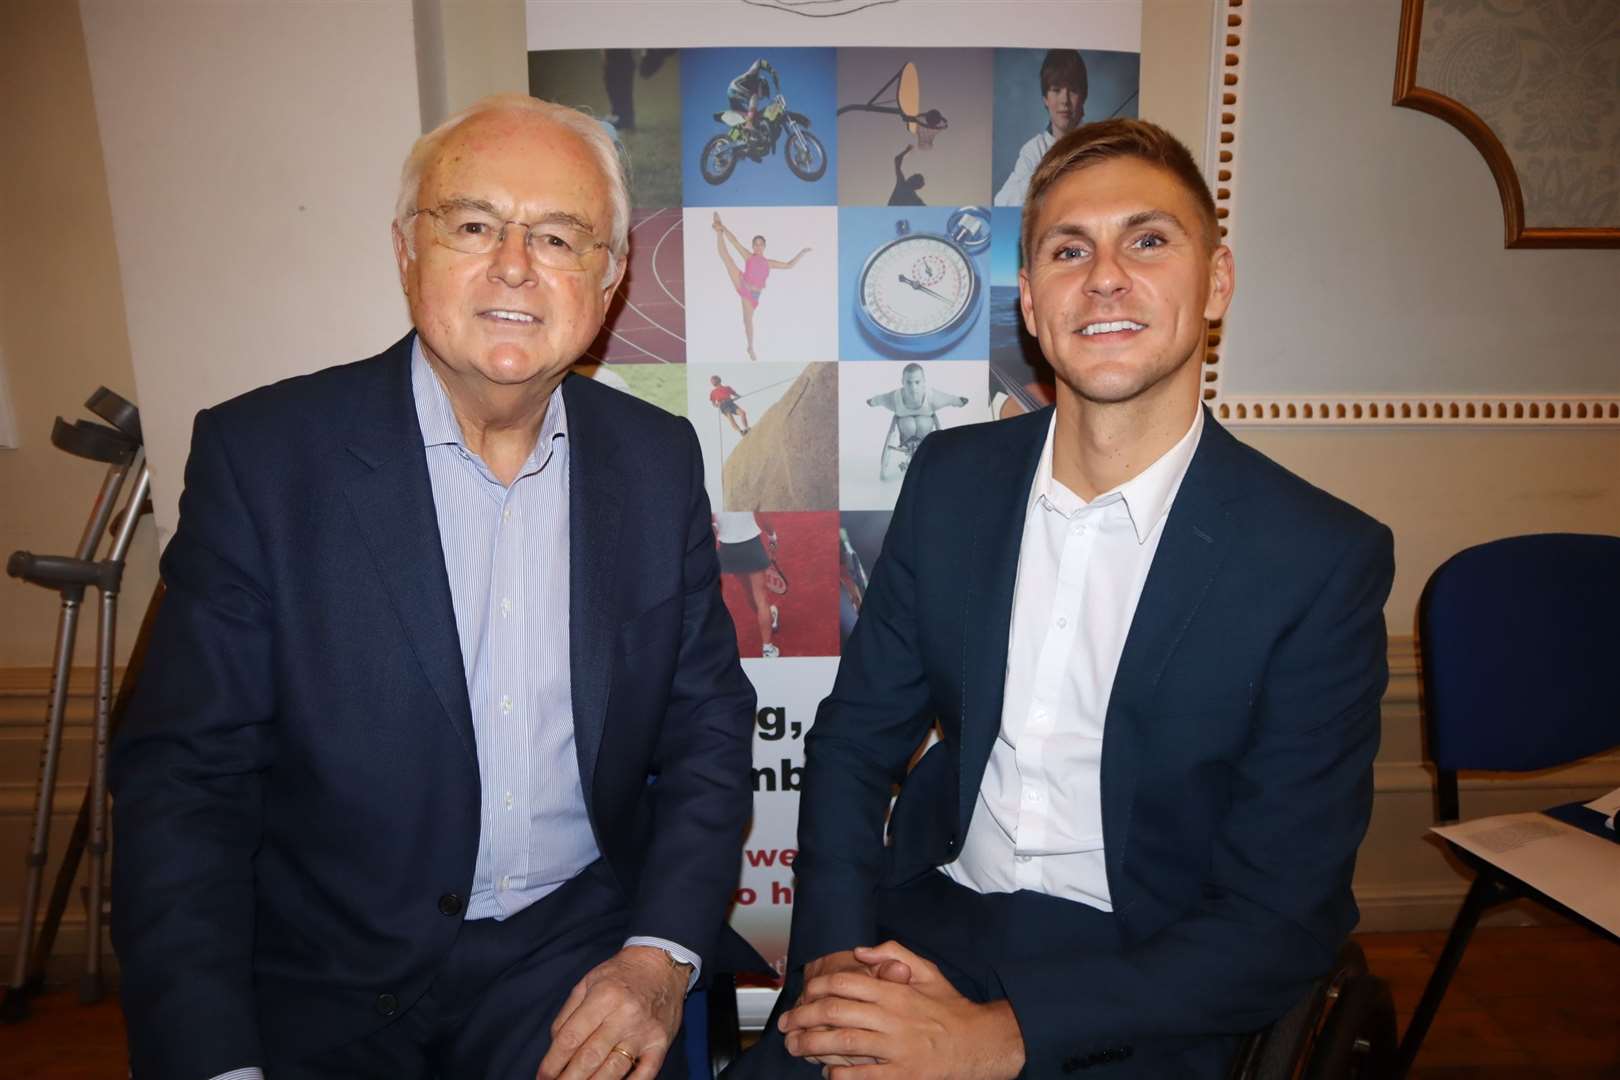 Former TV newsreader Martyn Lewis and paralympian Steve Brown from Sheppey quizzed each other at the Assembly Rooms, Faversham, for a fund-rasing night for the Swale Youth Development Fund (22422141)